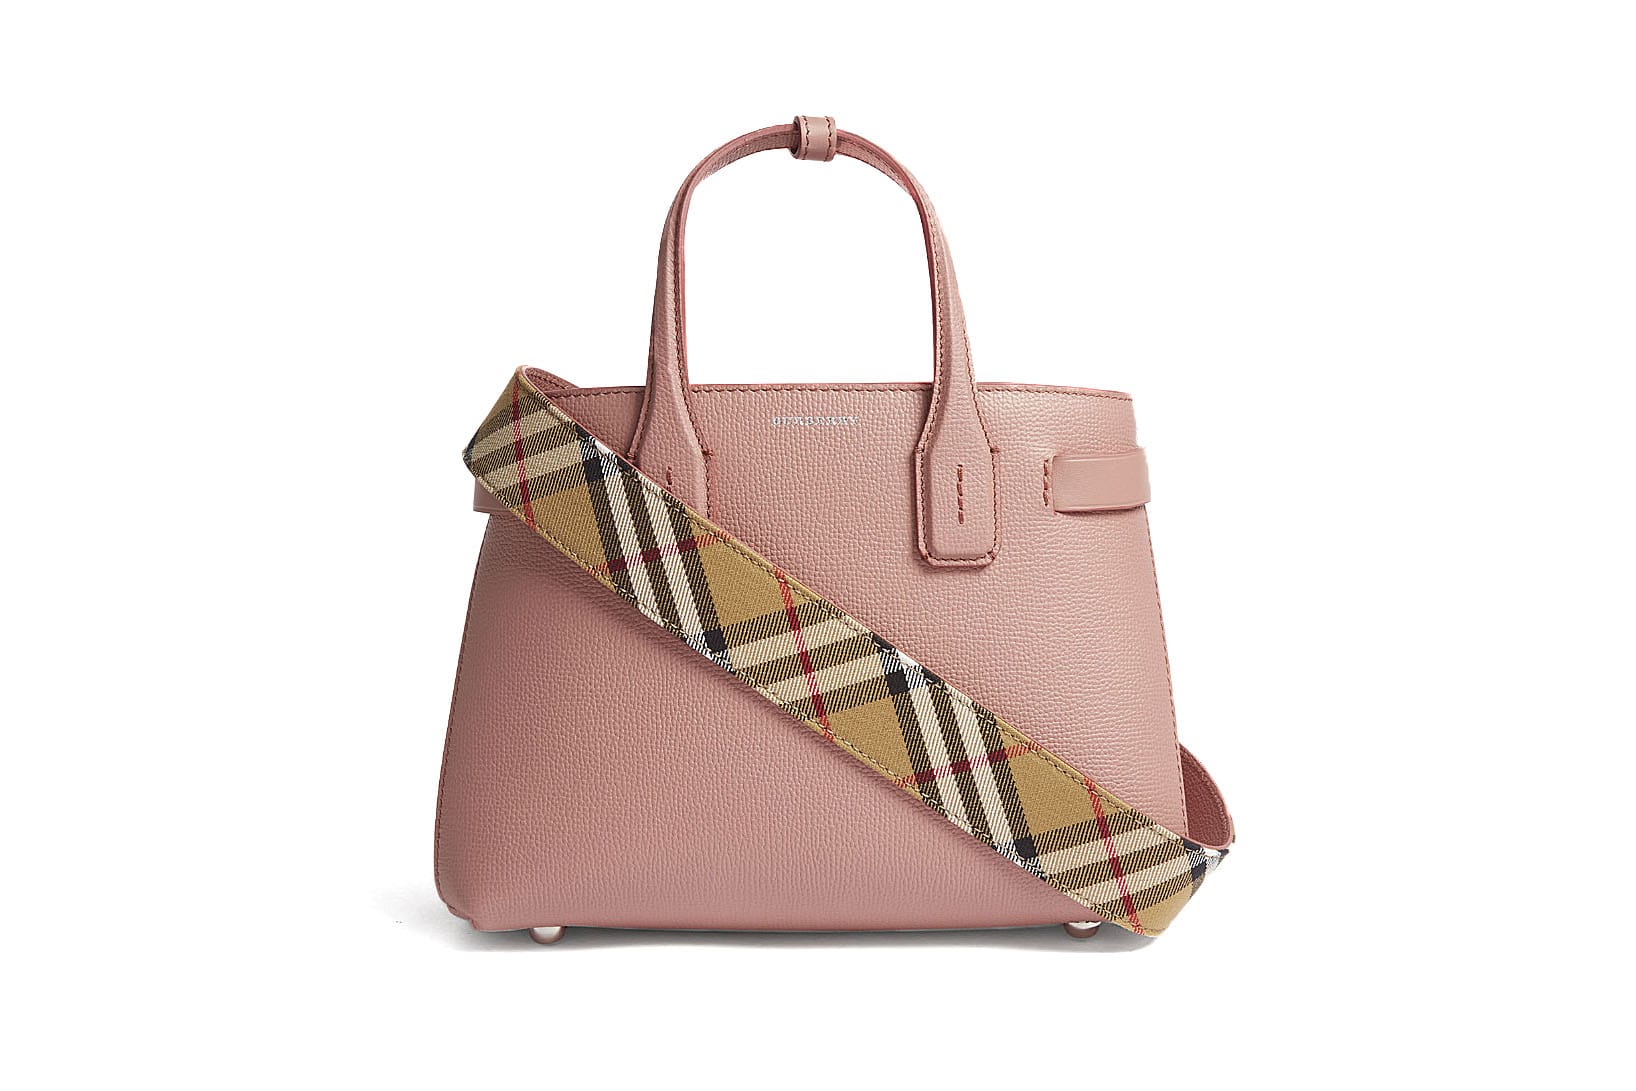 burberry 2018 bags